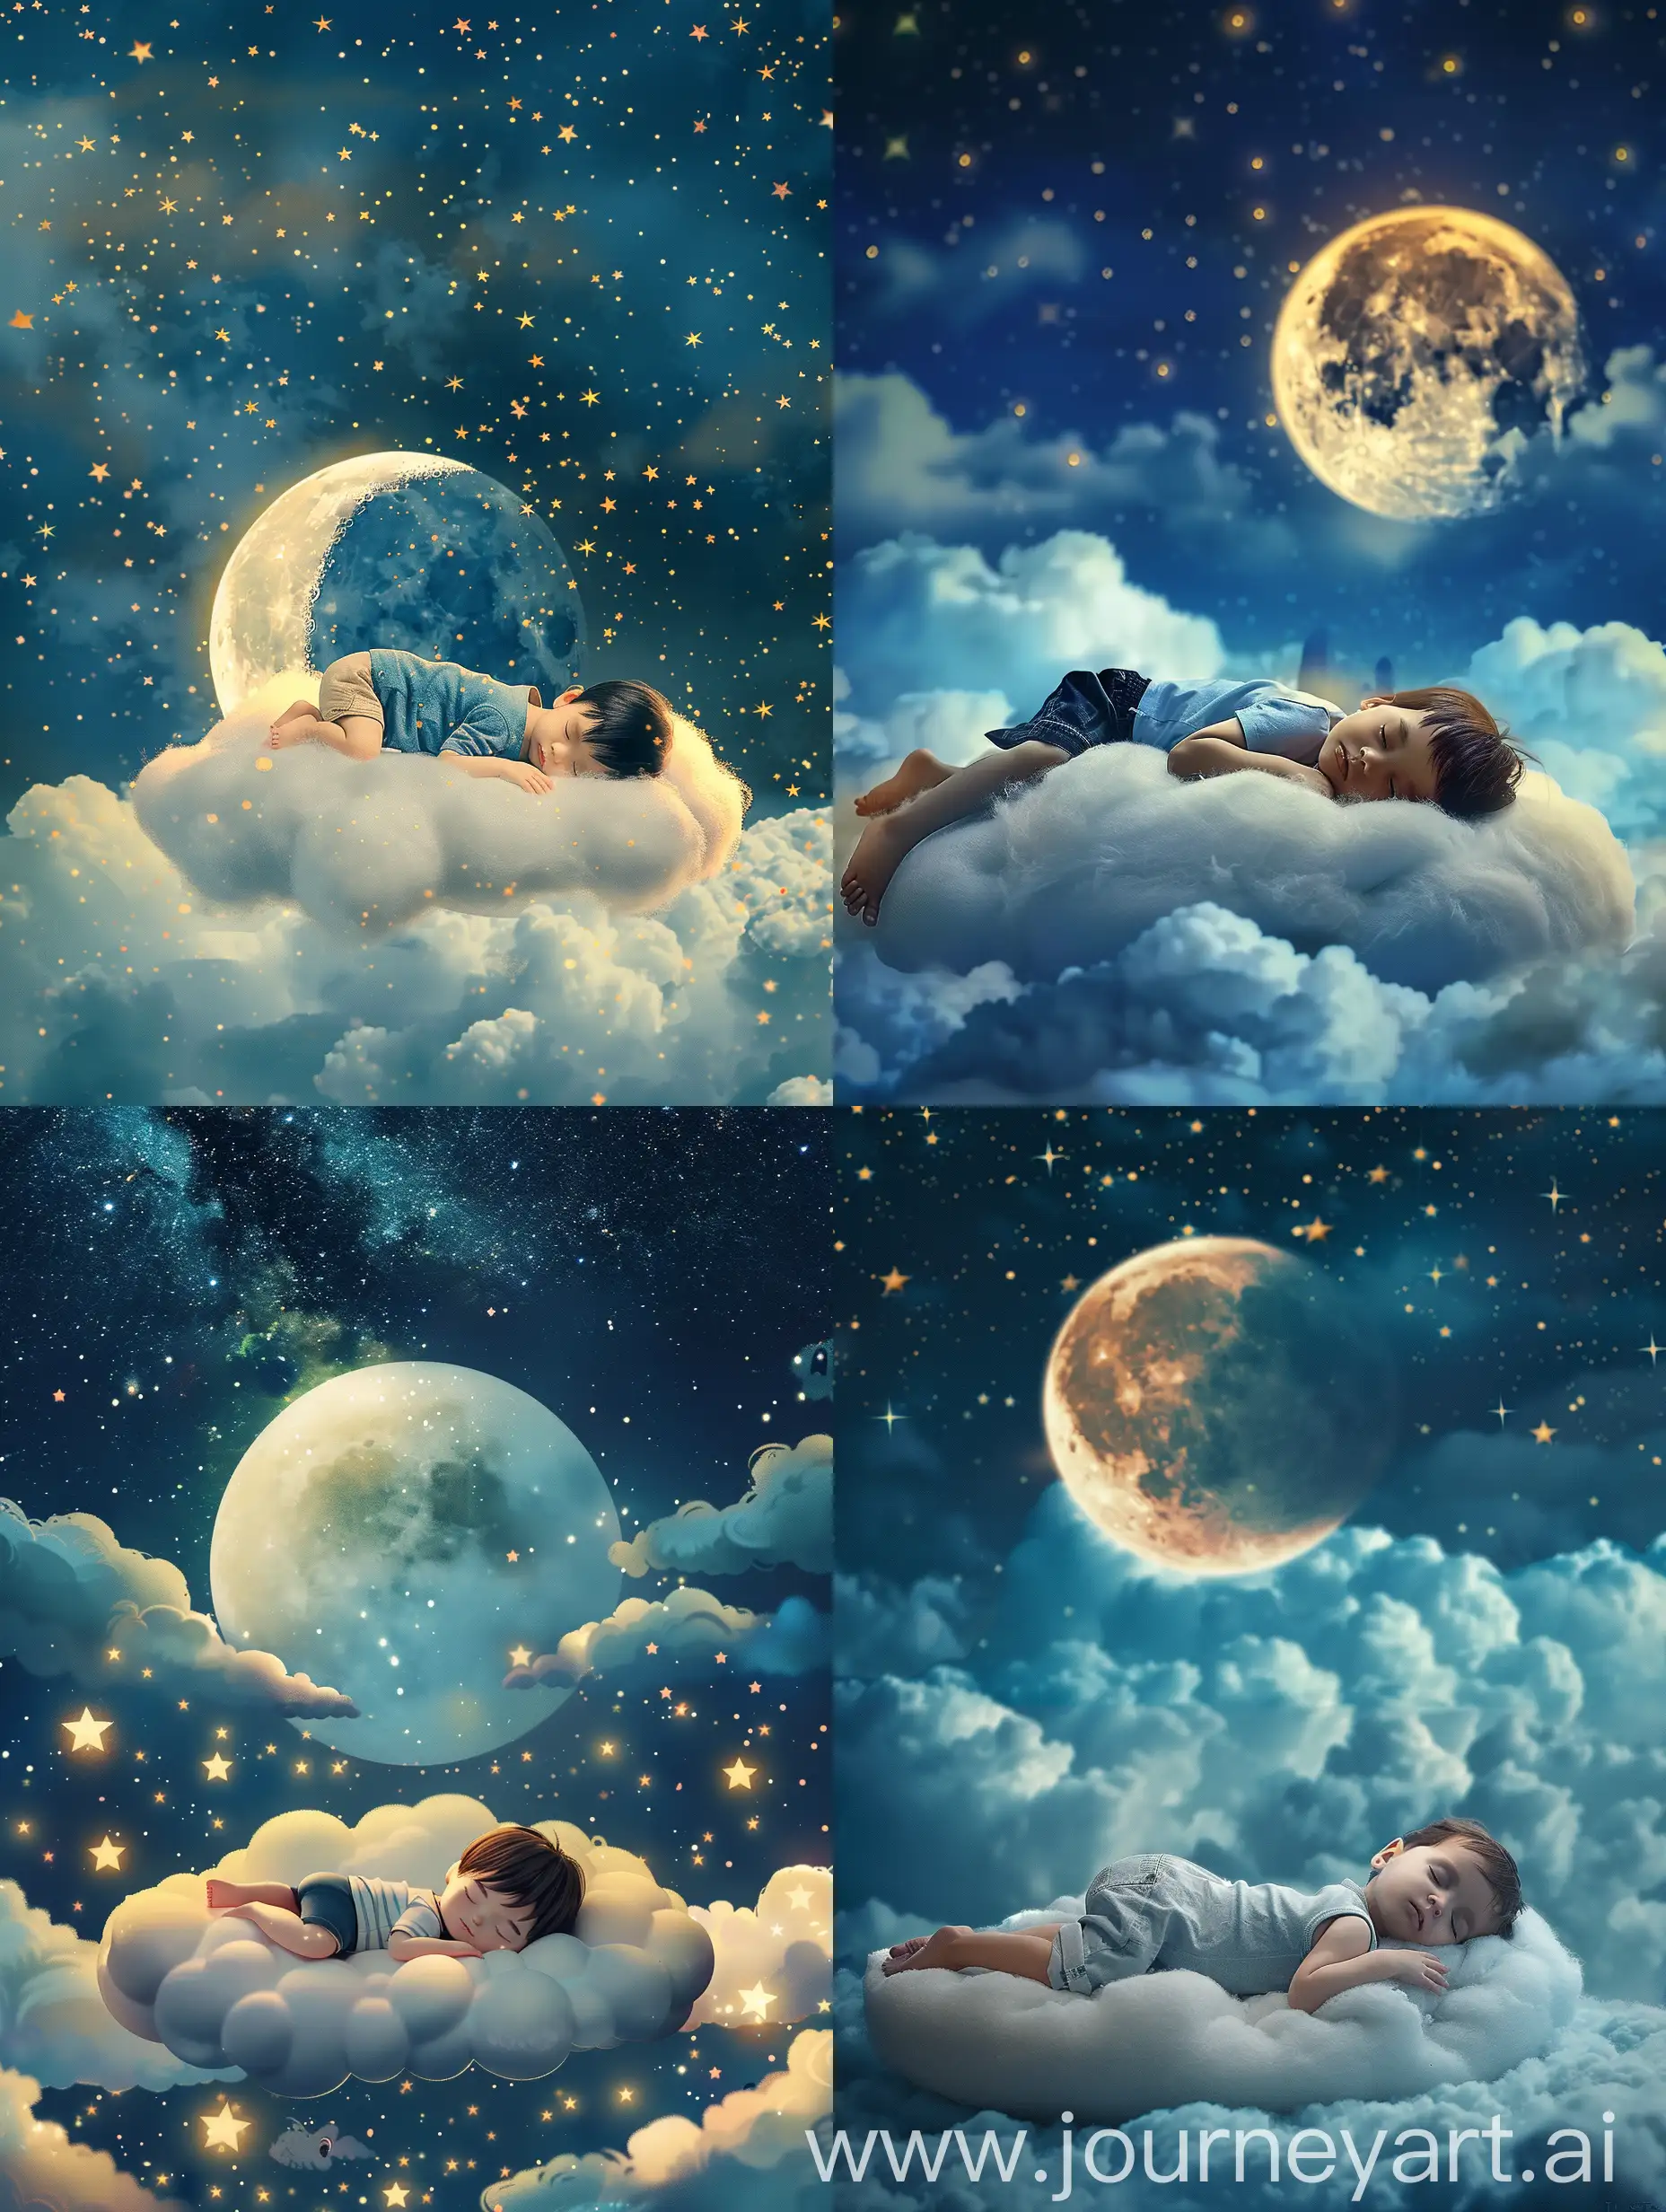 i want a 3d beautiful picture of a cute little boy sleeping on the cloud bed at night time and a big moon behind him and many stars in the sky